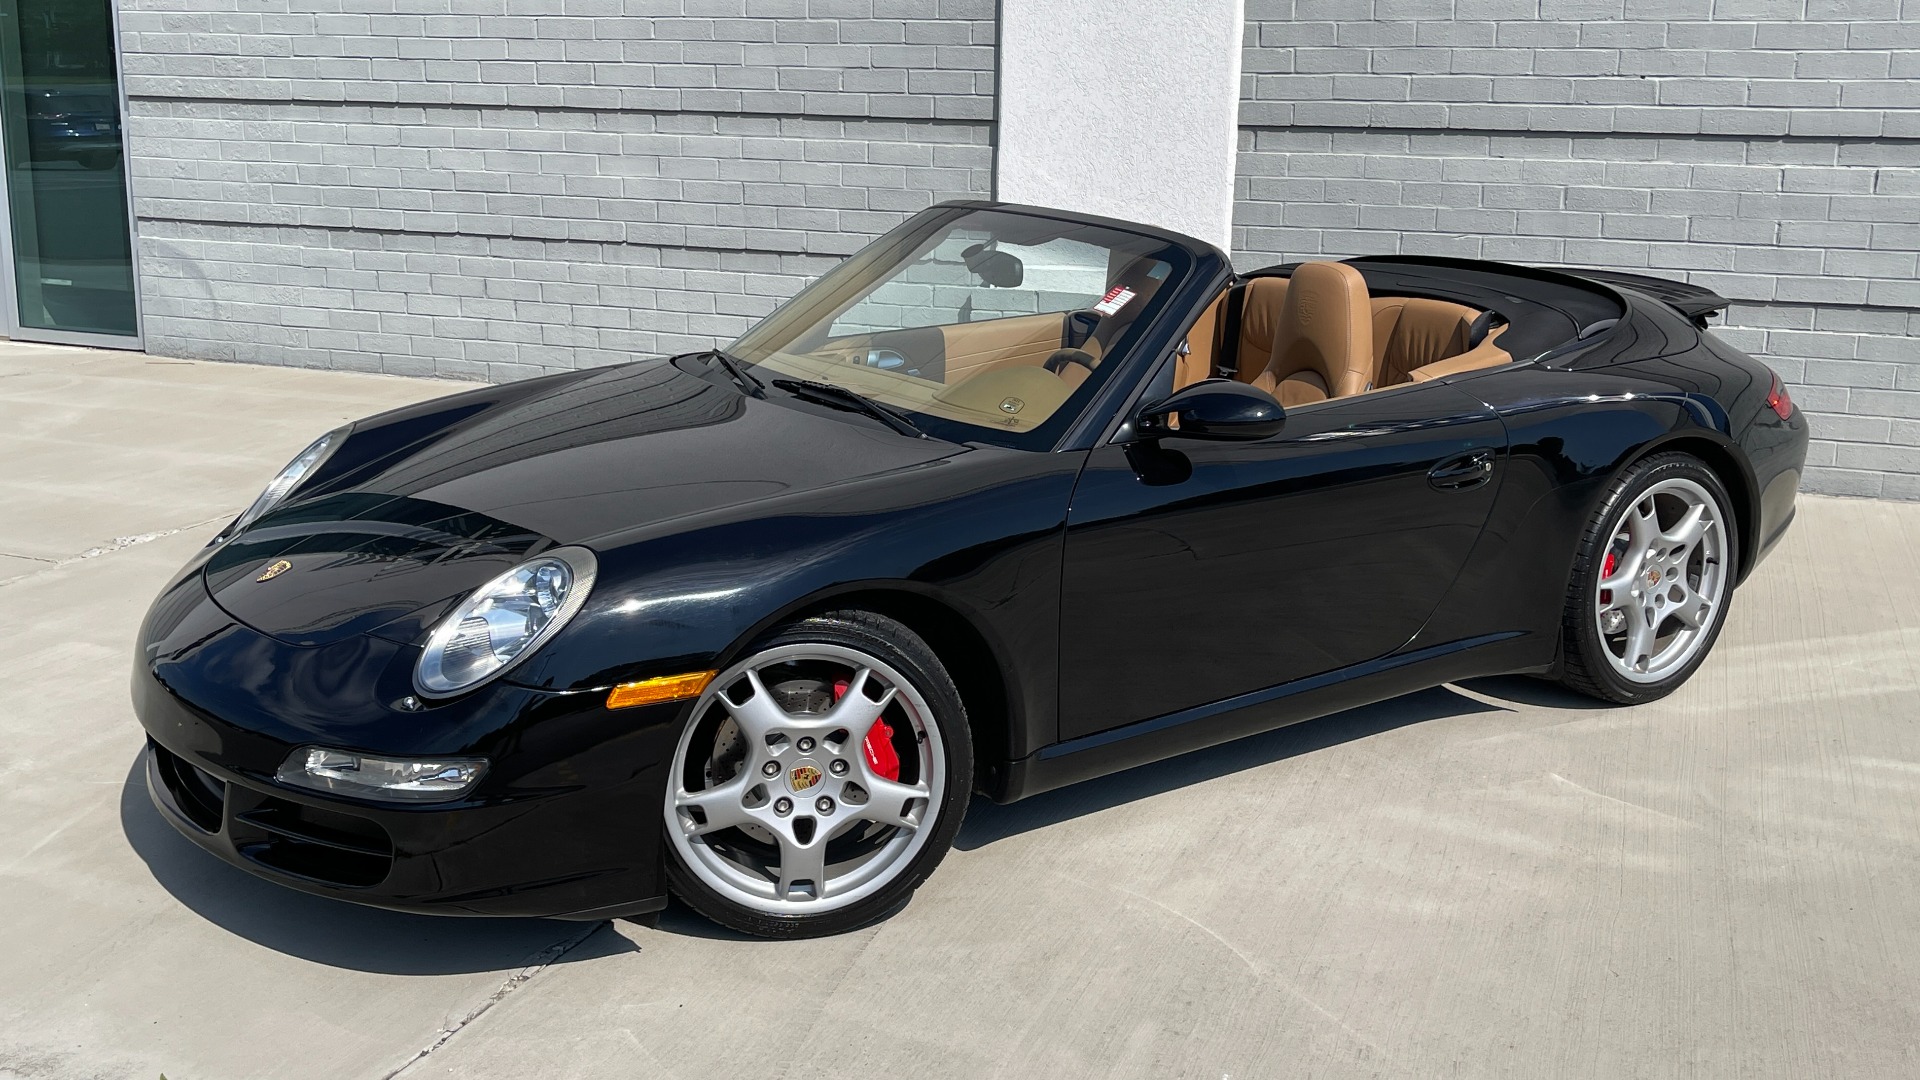 Used 2006 Porsche 911 CARRERA S CABRIOLET / BOSE / CD CHANGER / PWR SEAT PKG / HTD STS for sale $60,999 at Formula Imports in Charlotte NC 28227 8